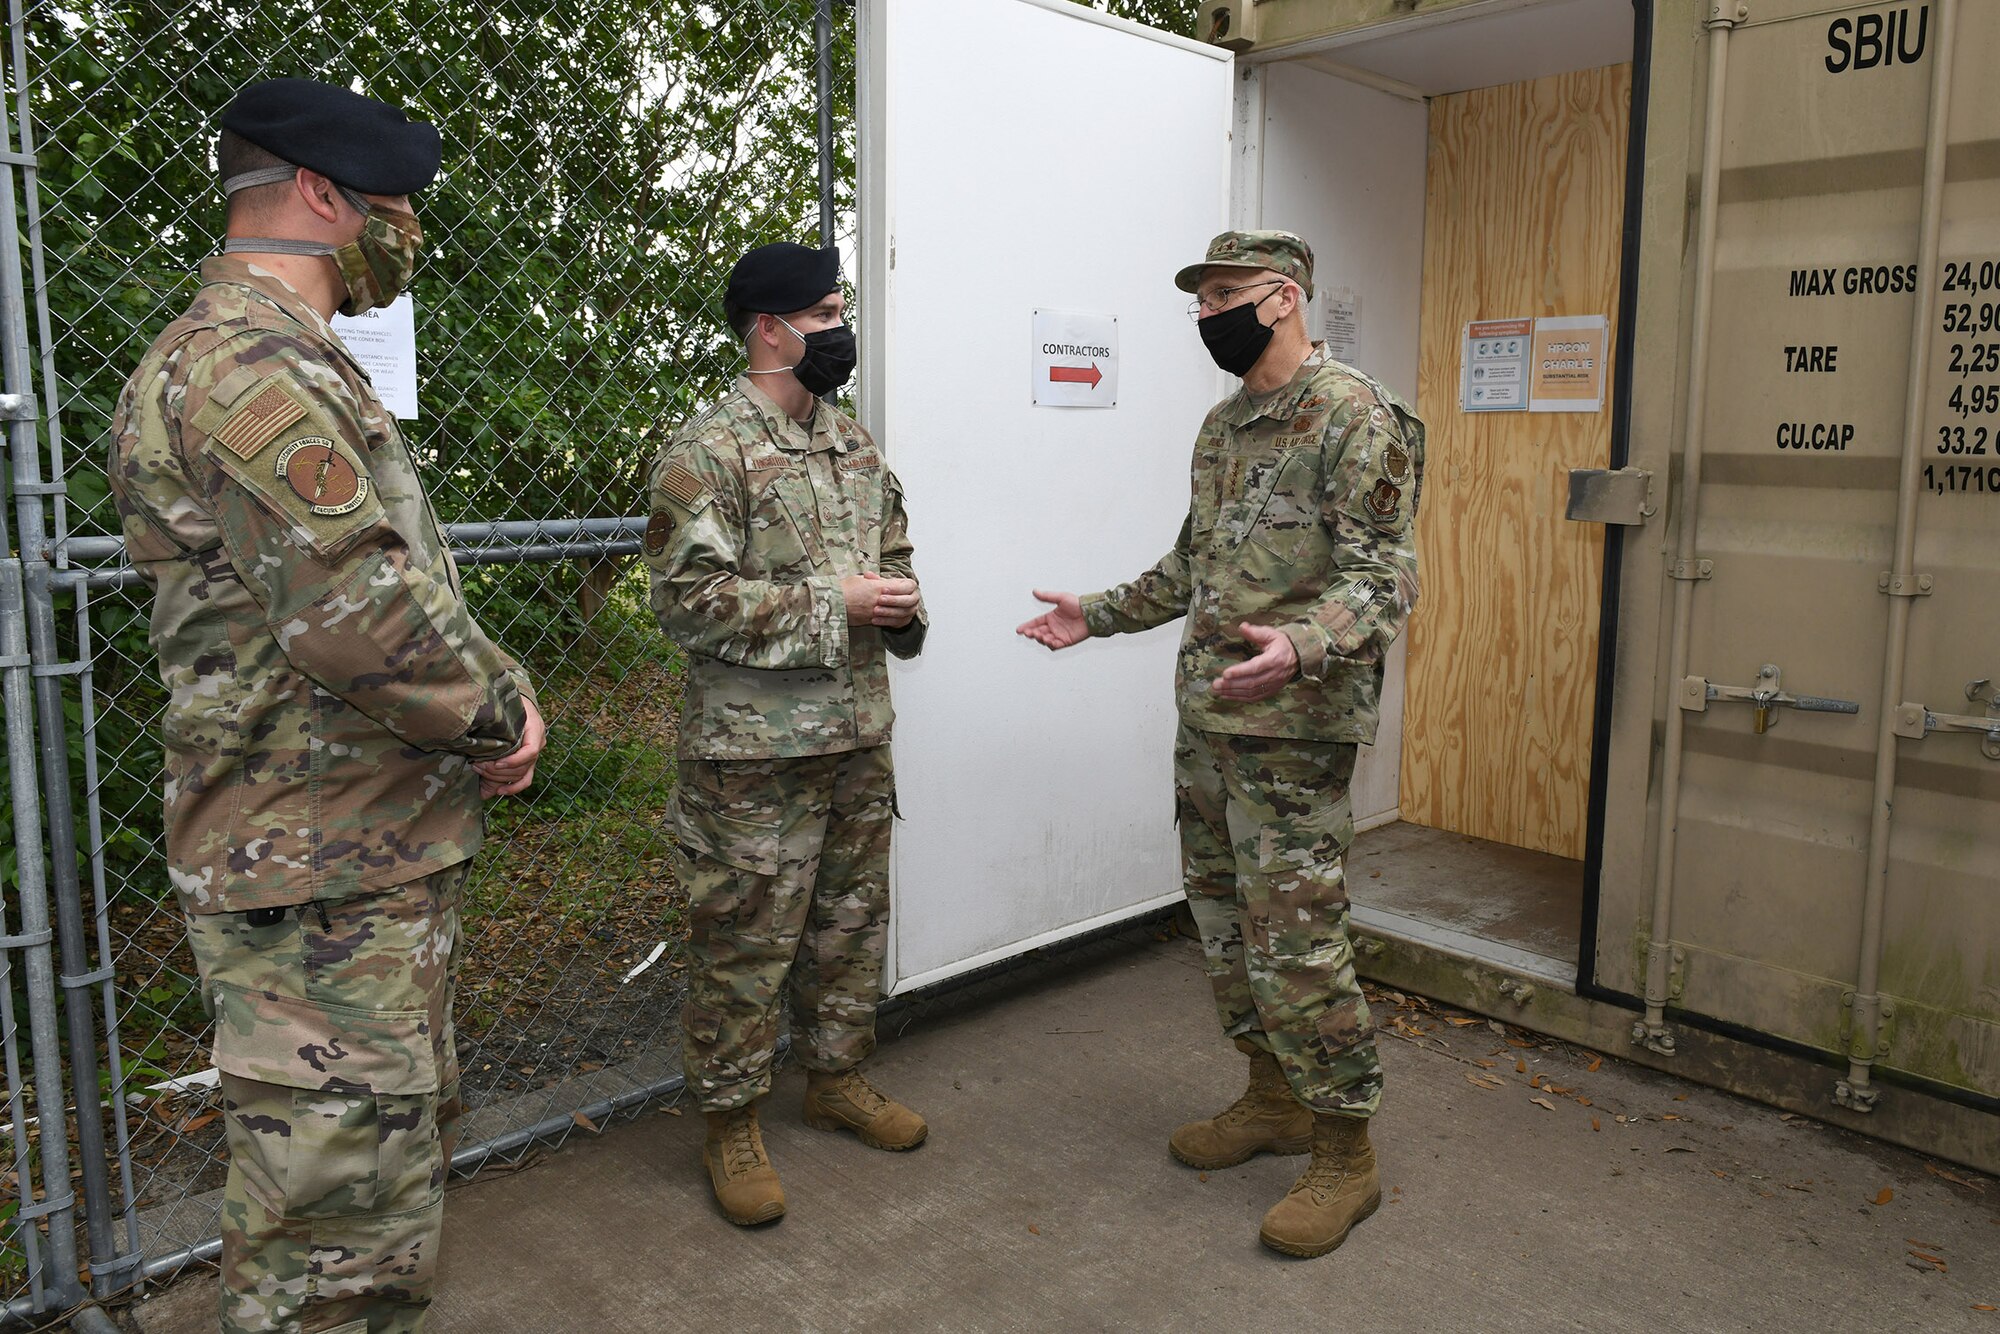 Photo shows two security forces personnel talking with the general in front of a waiting area outside.